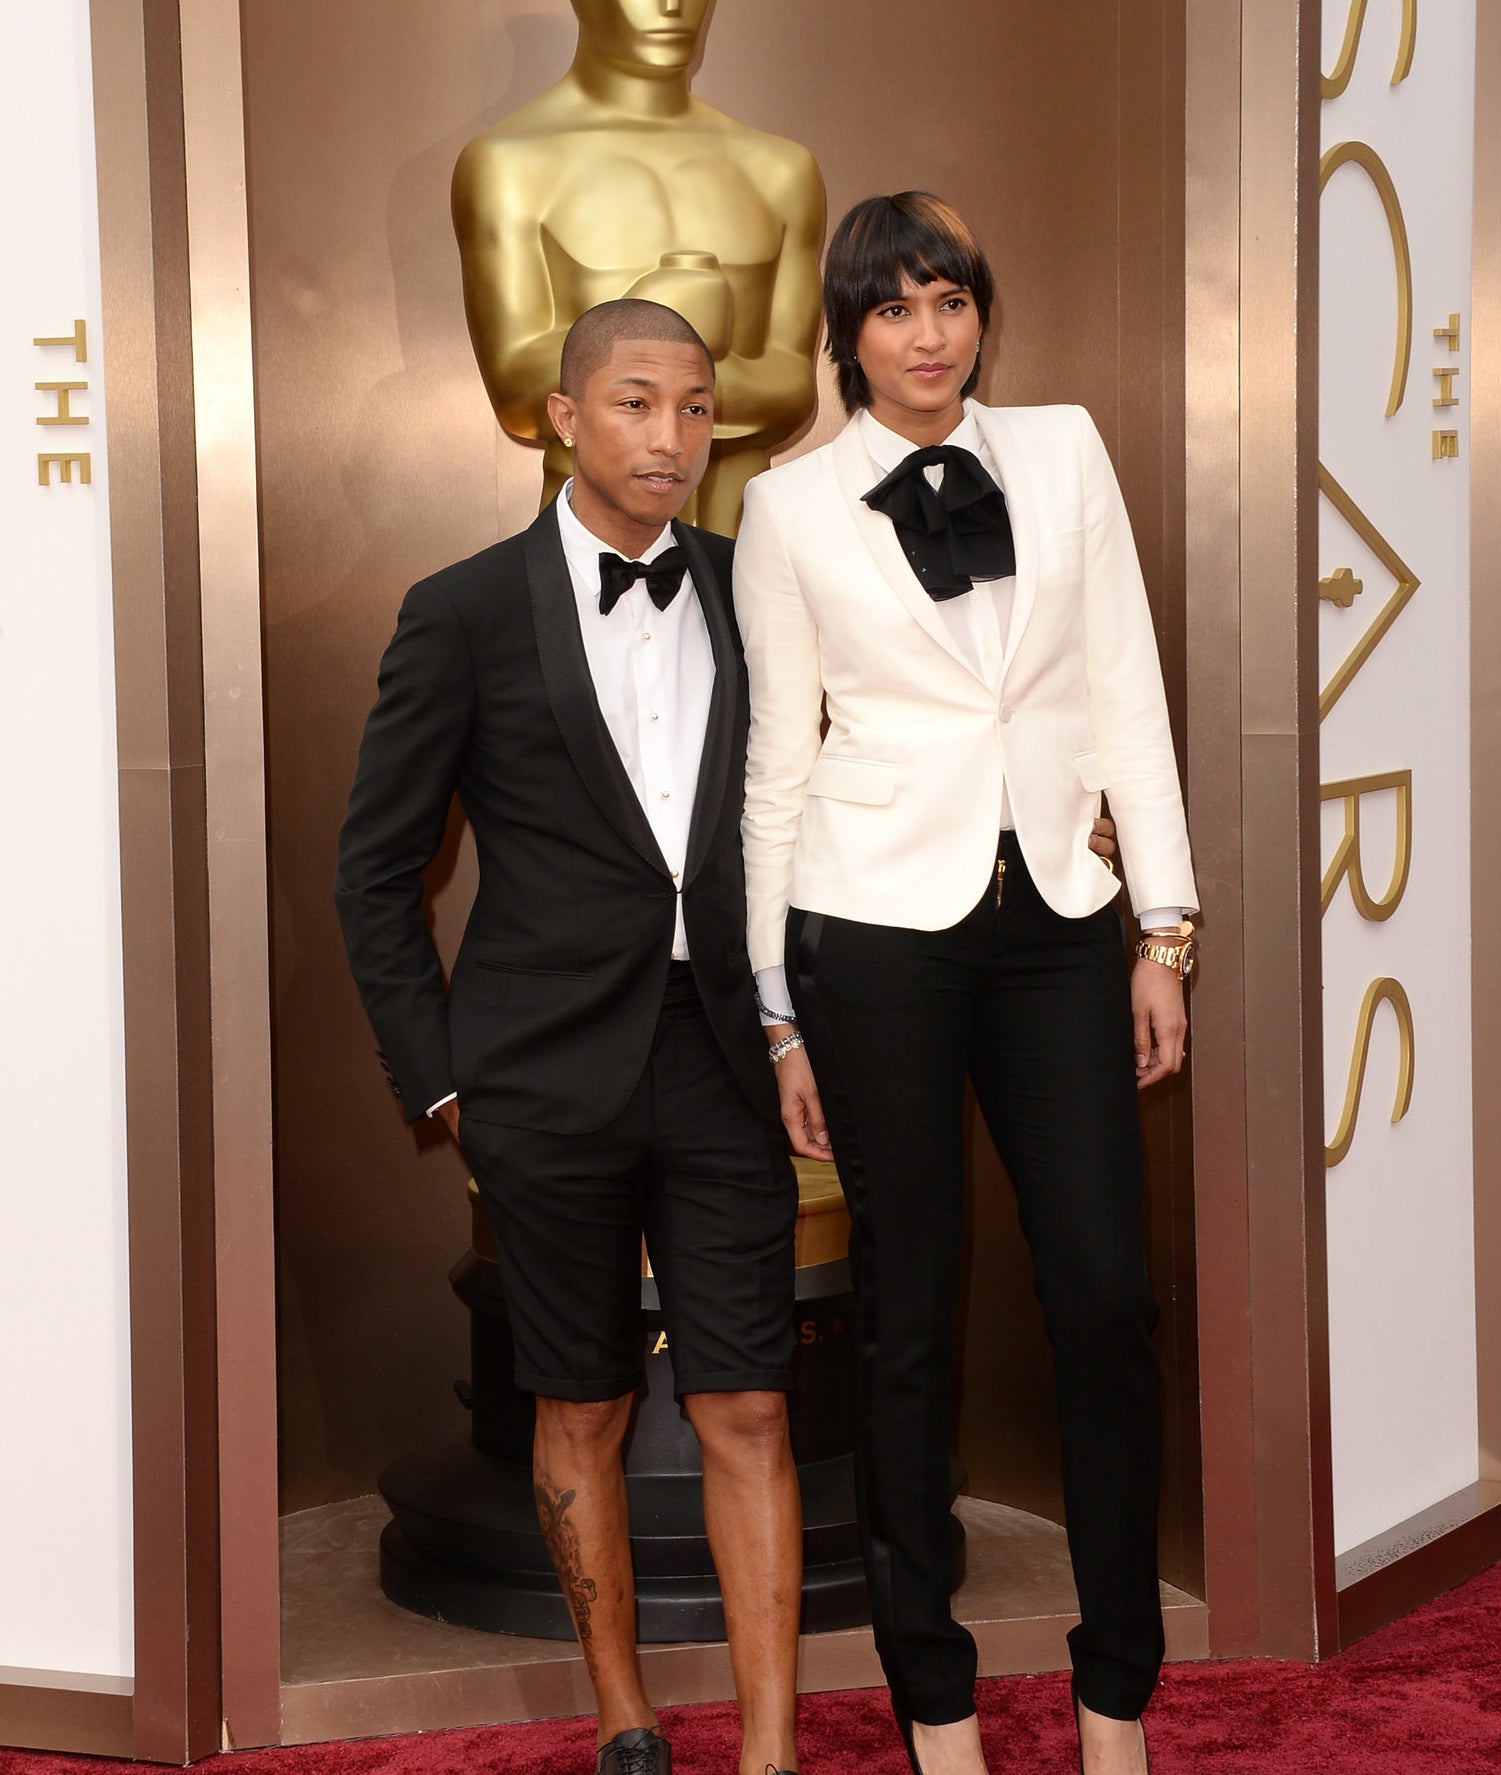 Oscars: Pharrell Williams to Perform – The Hollywood Reporter